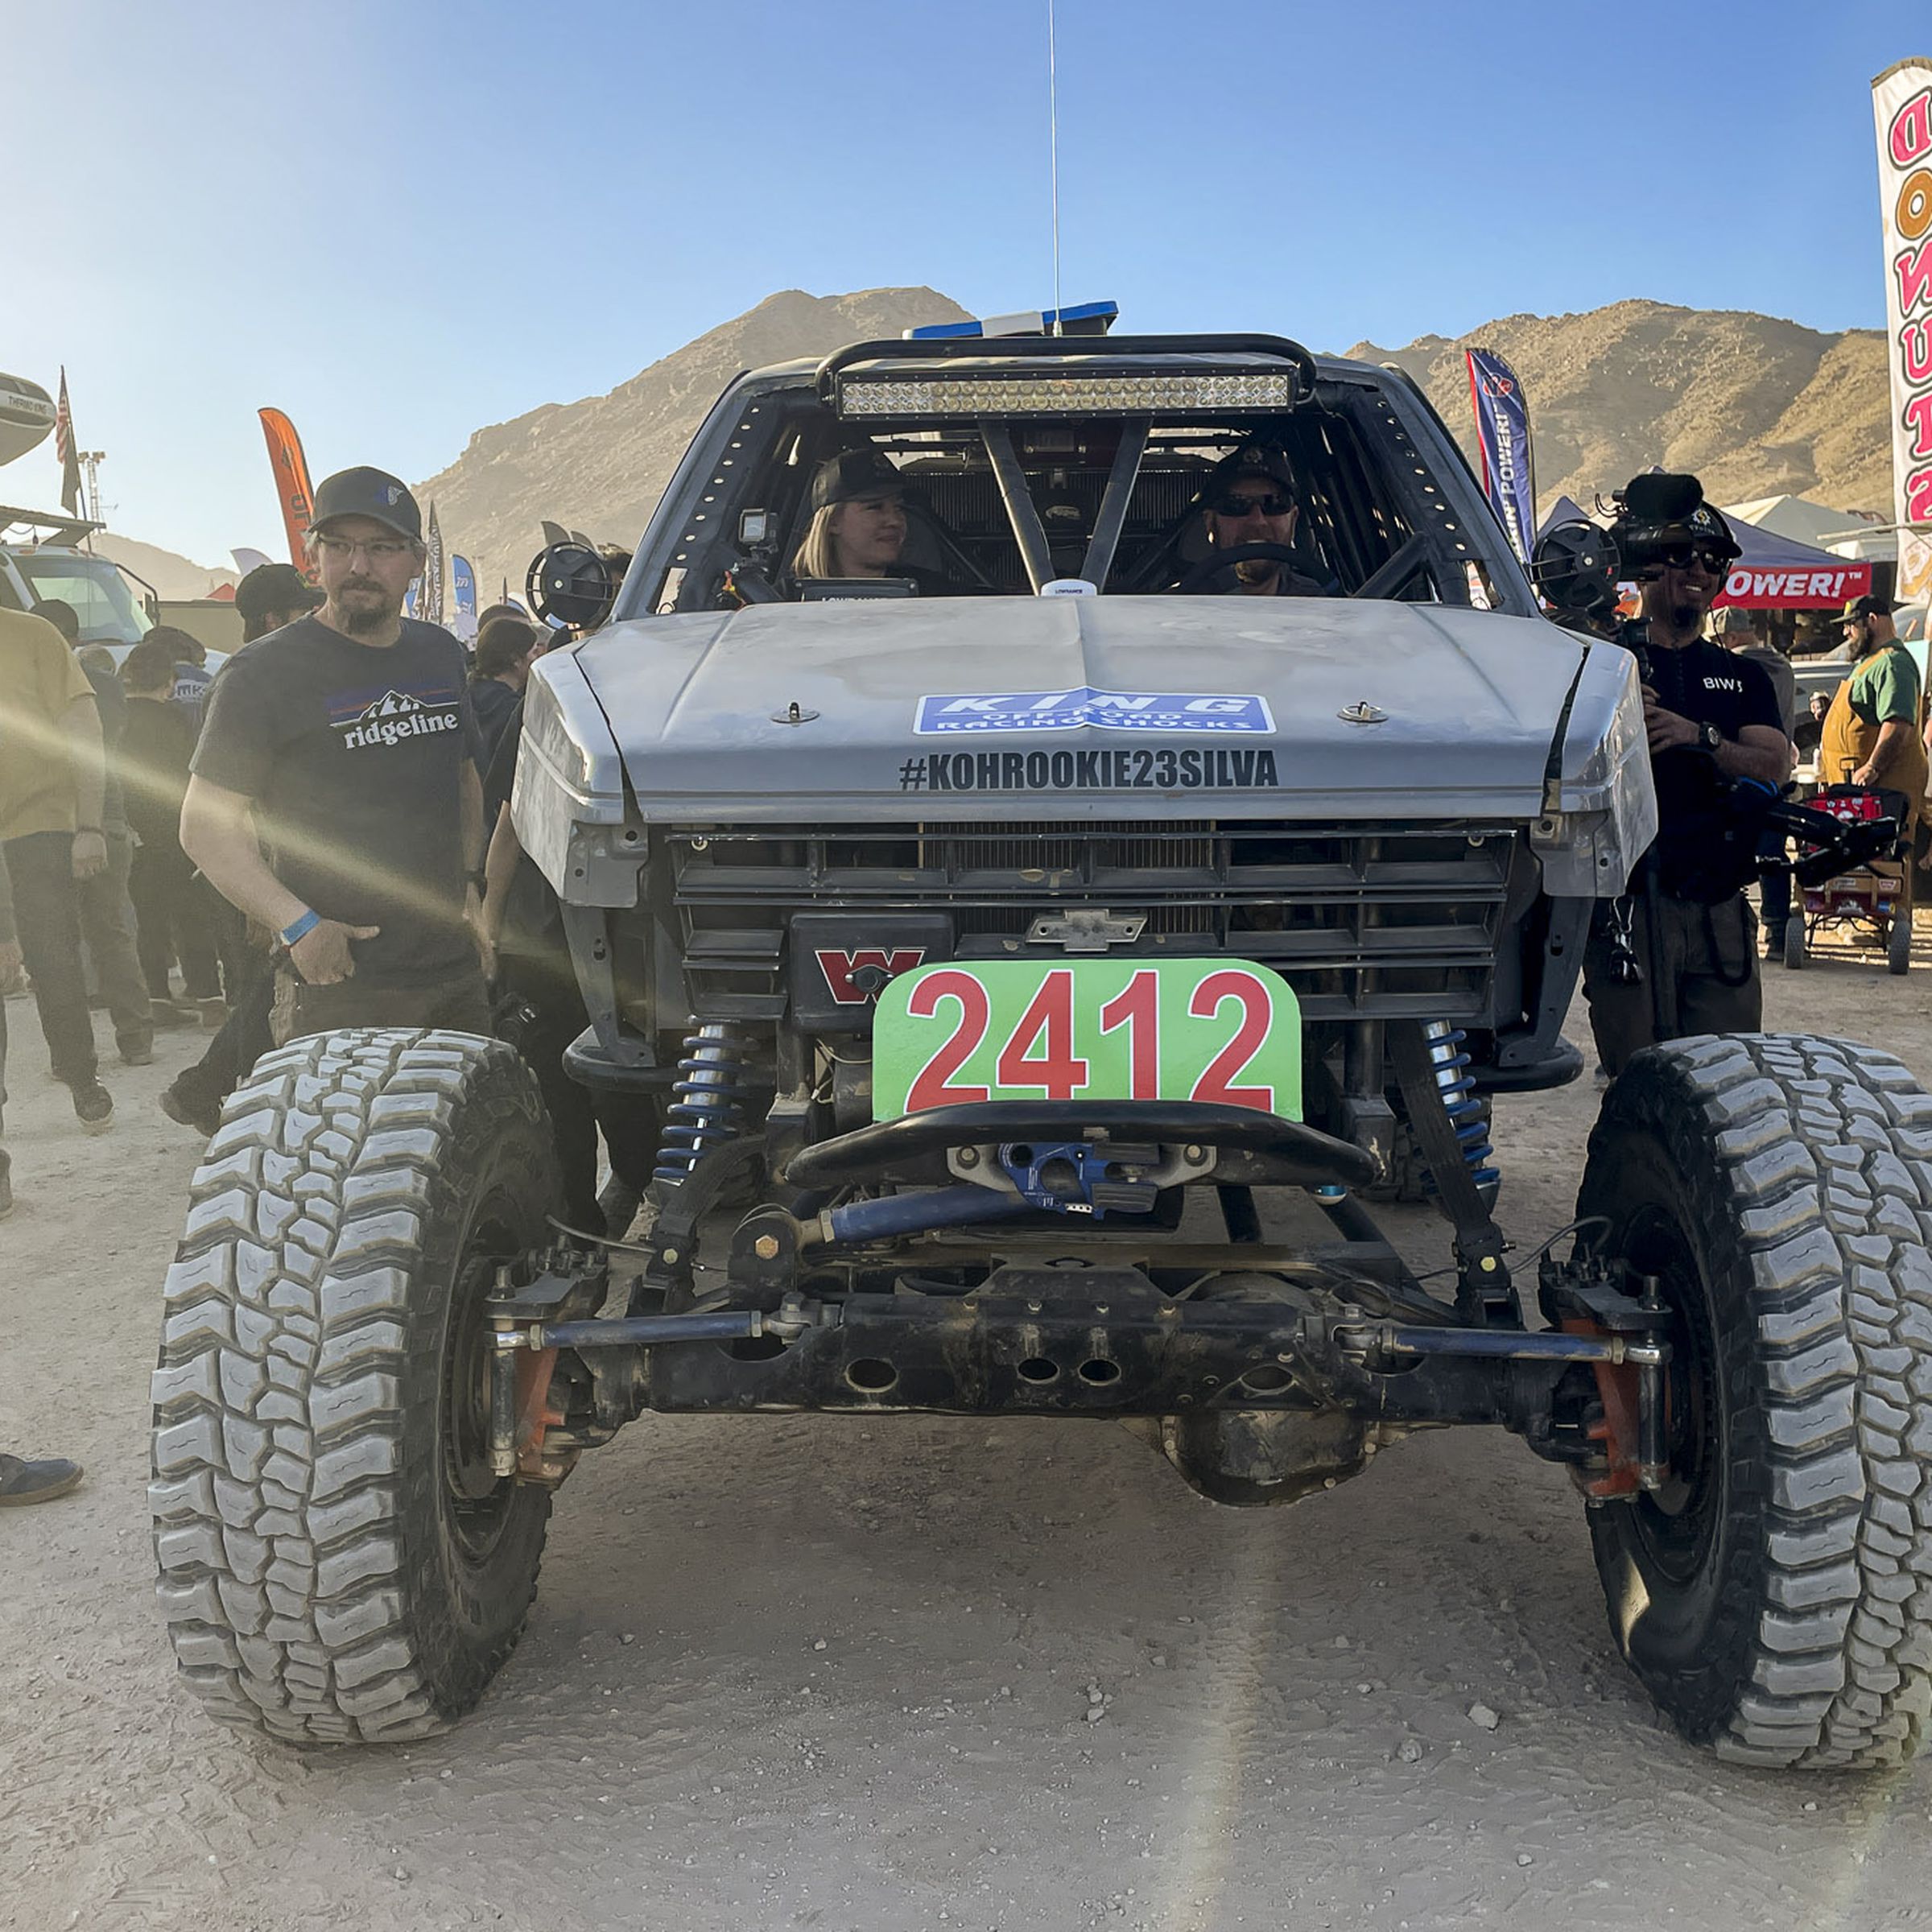 Keith and Melissa Silva’s EV rock crawler at King of the Hammers